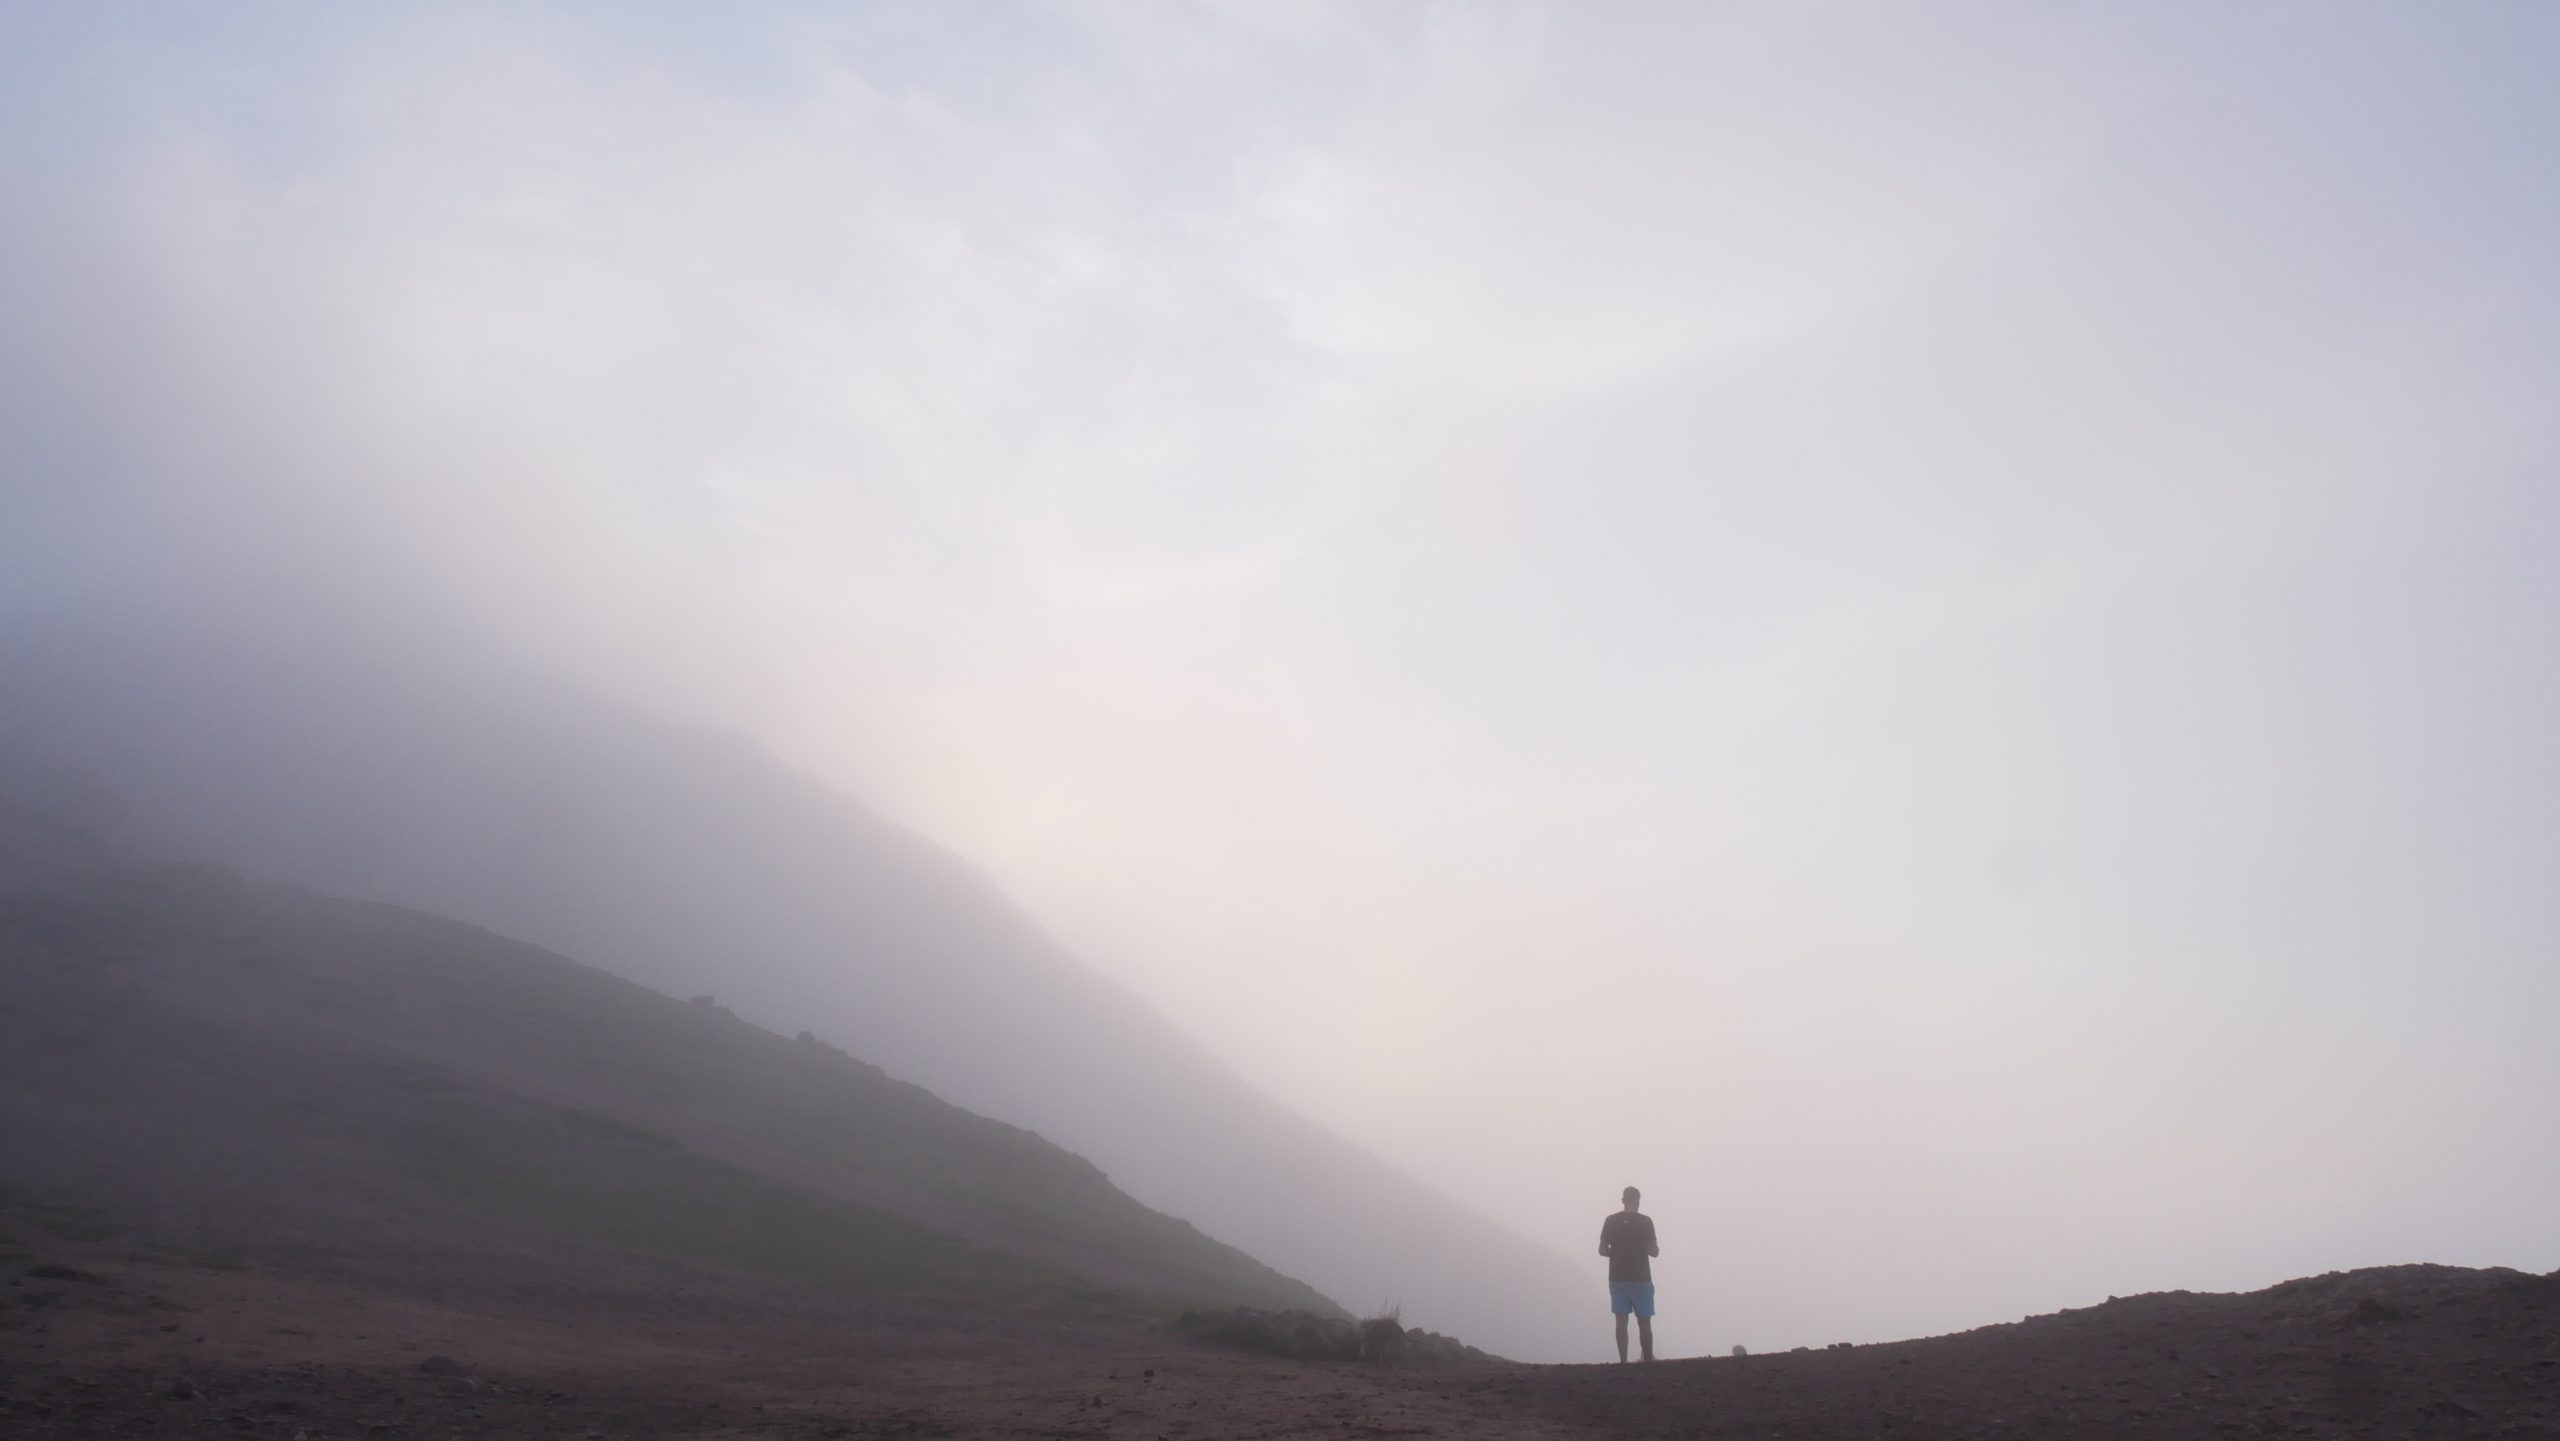 A person silhouetted in the mist at the top of a mountain